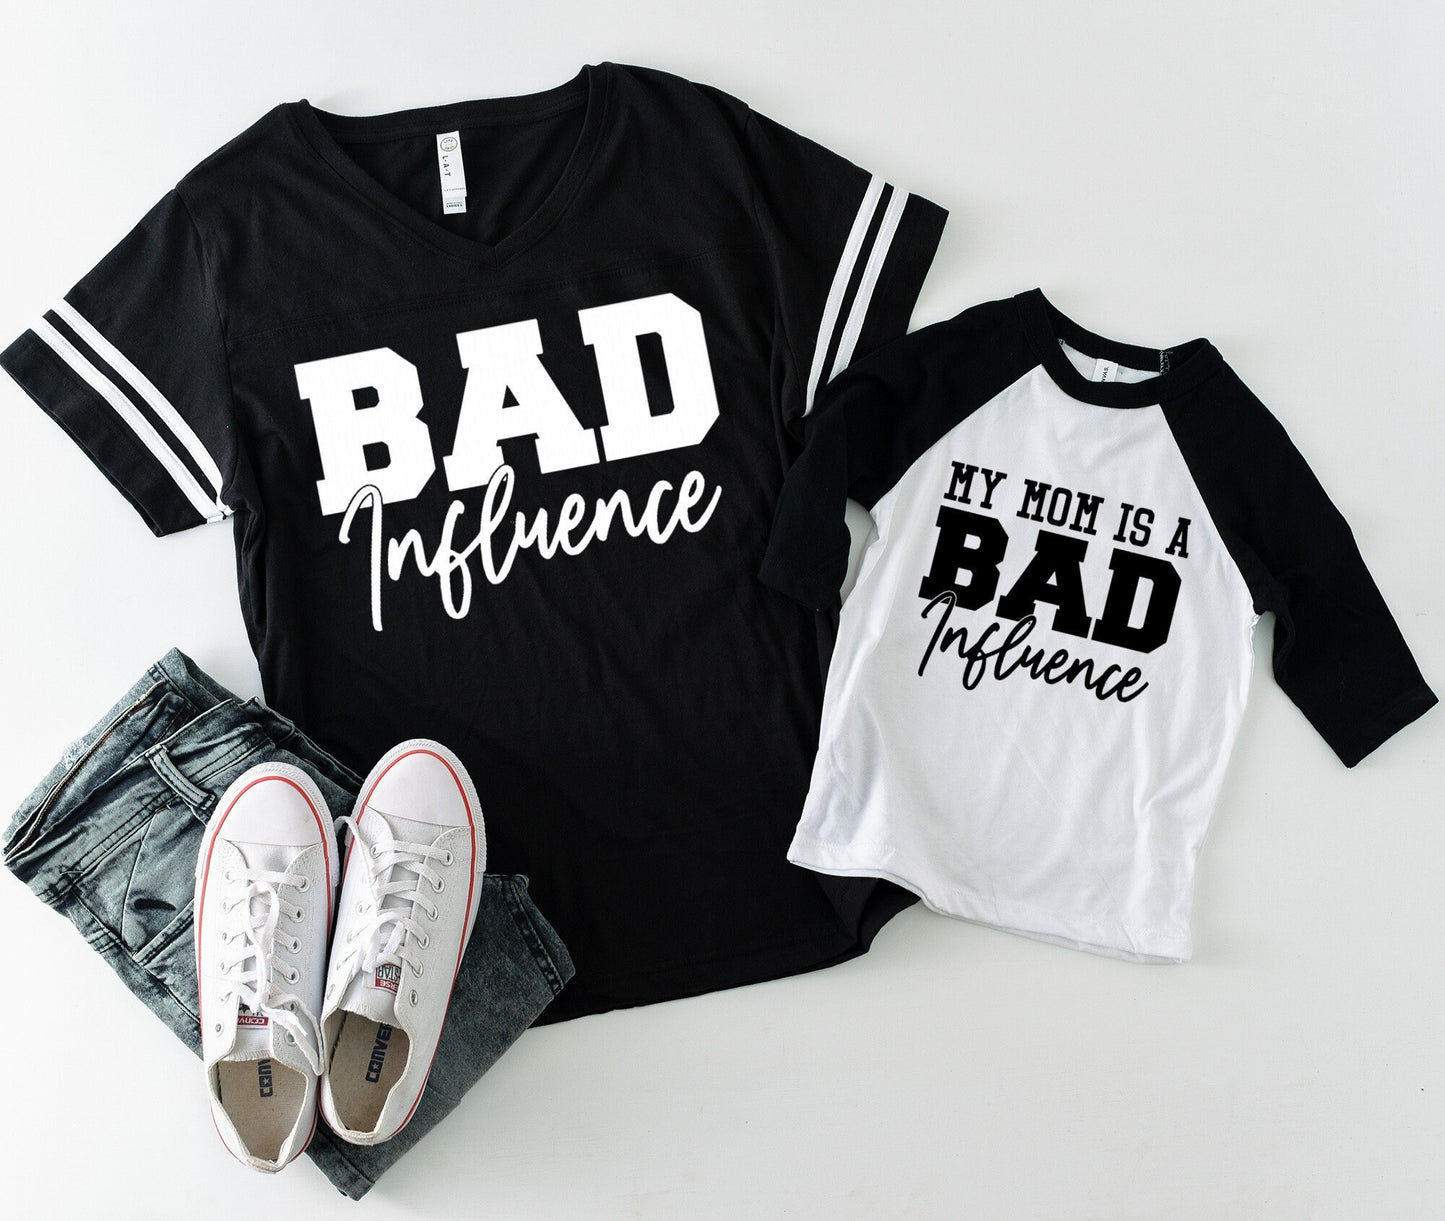 Bad Influence and My Mom is a Bad Influence Football and Baseball Raglan t-shirts - Mommy and Me shirts - Mommy and Son Matching Shirts